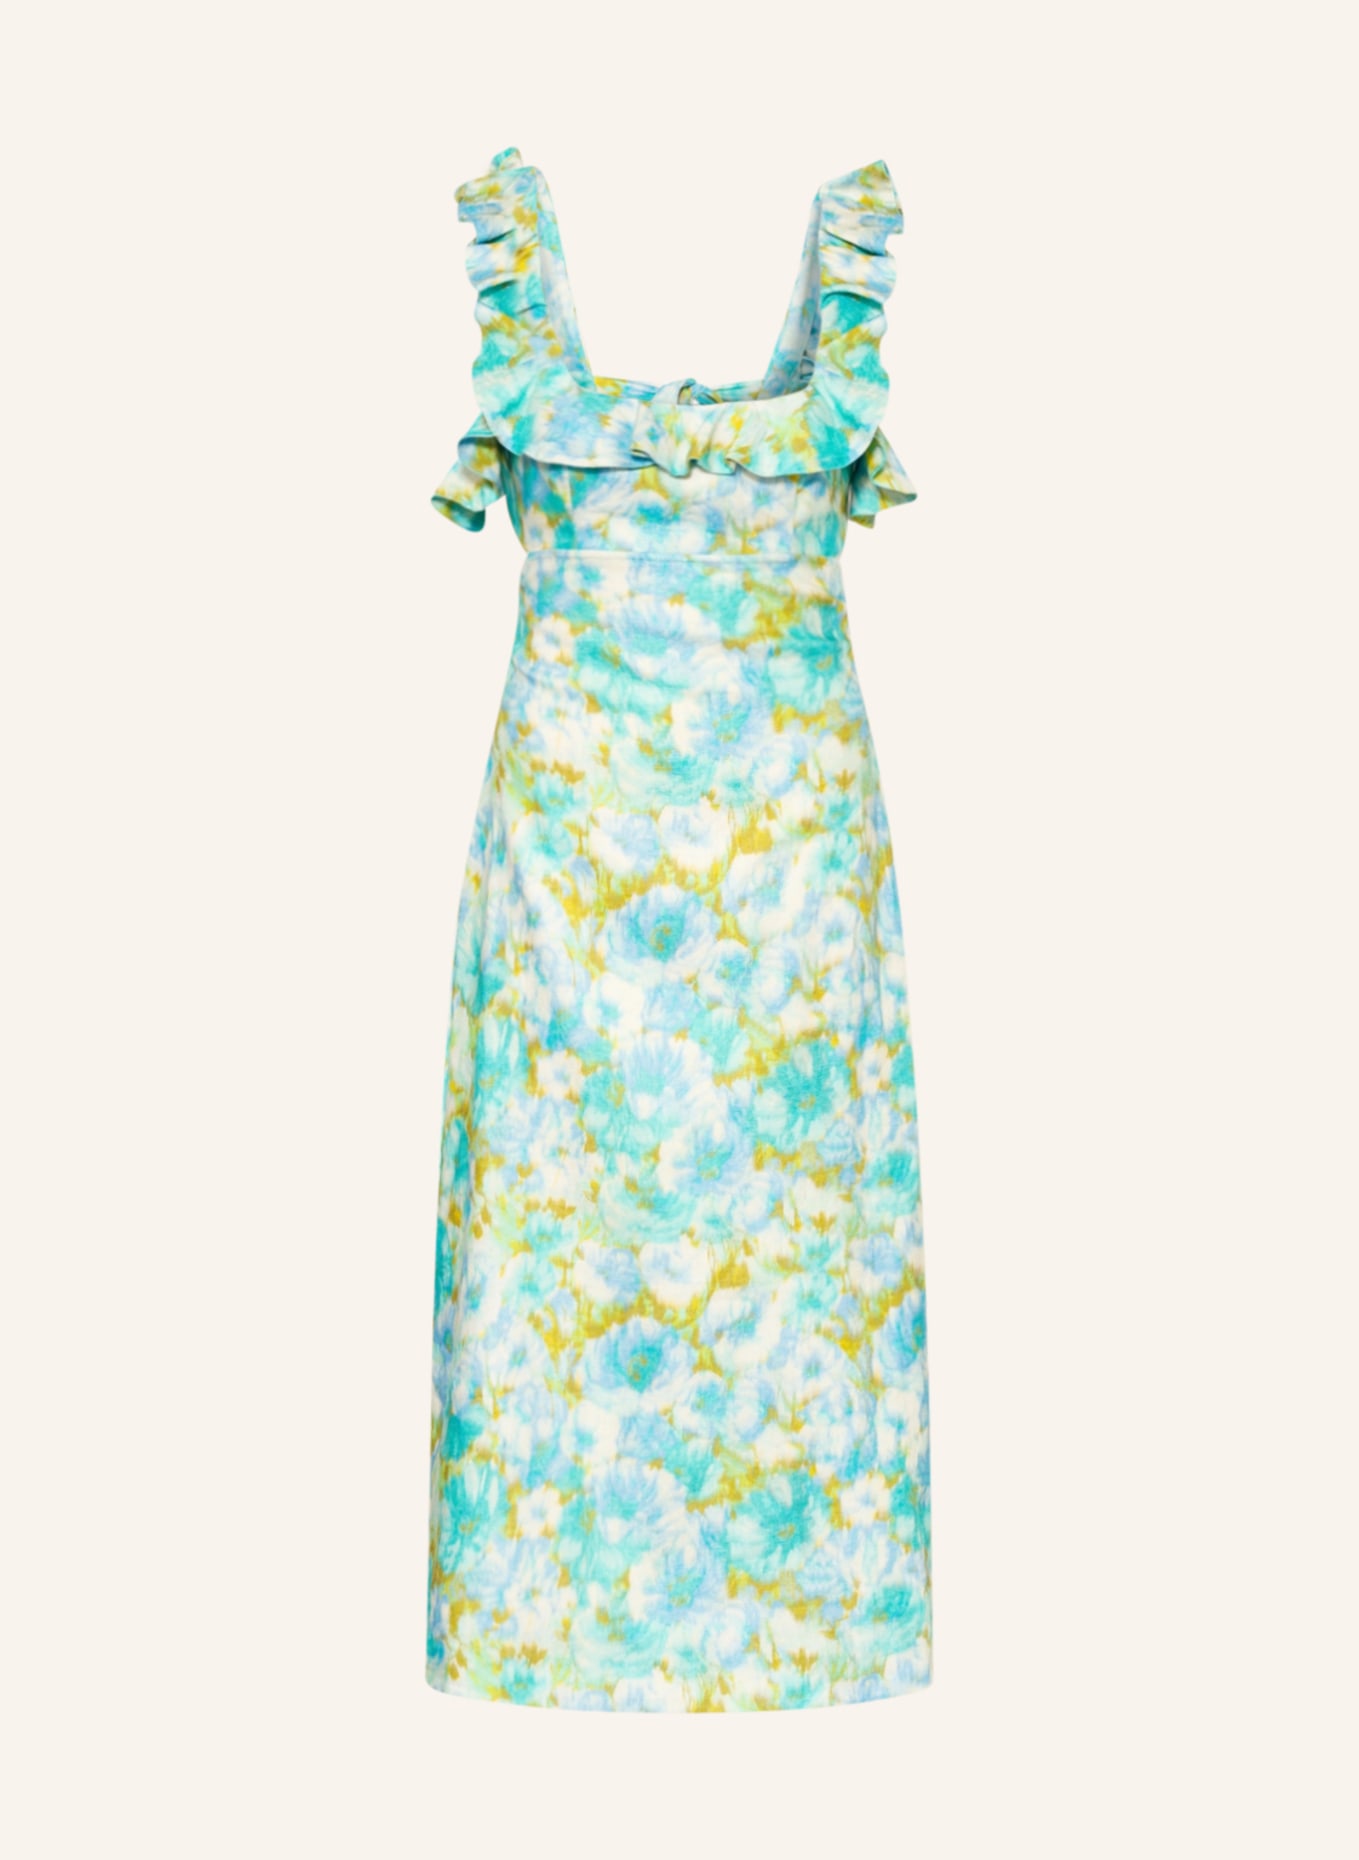 ZIMMERMANN Linen dress HIGH TIDE with frills, Color: NEON TURQUOISE/ LIGHT BLUE/ DARK YELLOW (Image 1)